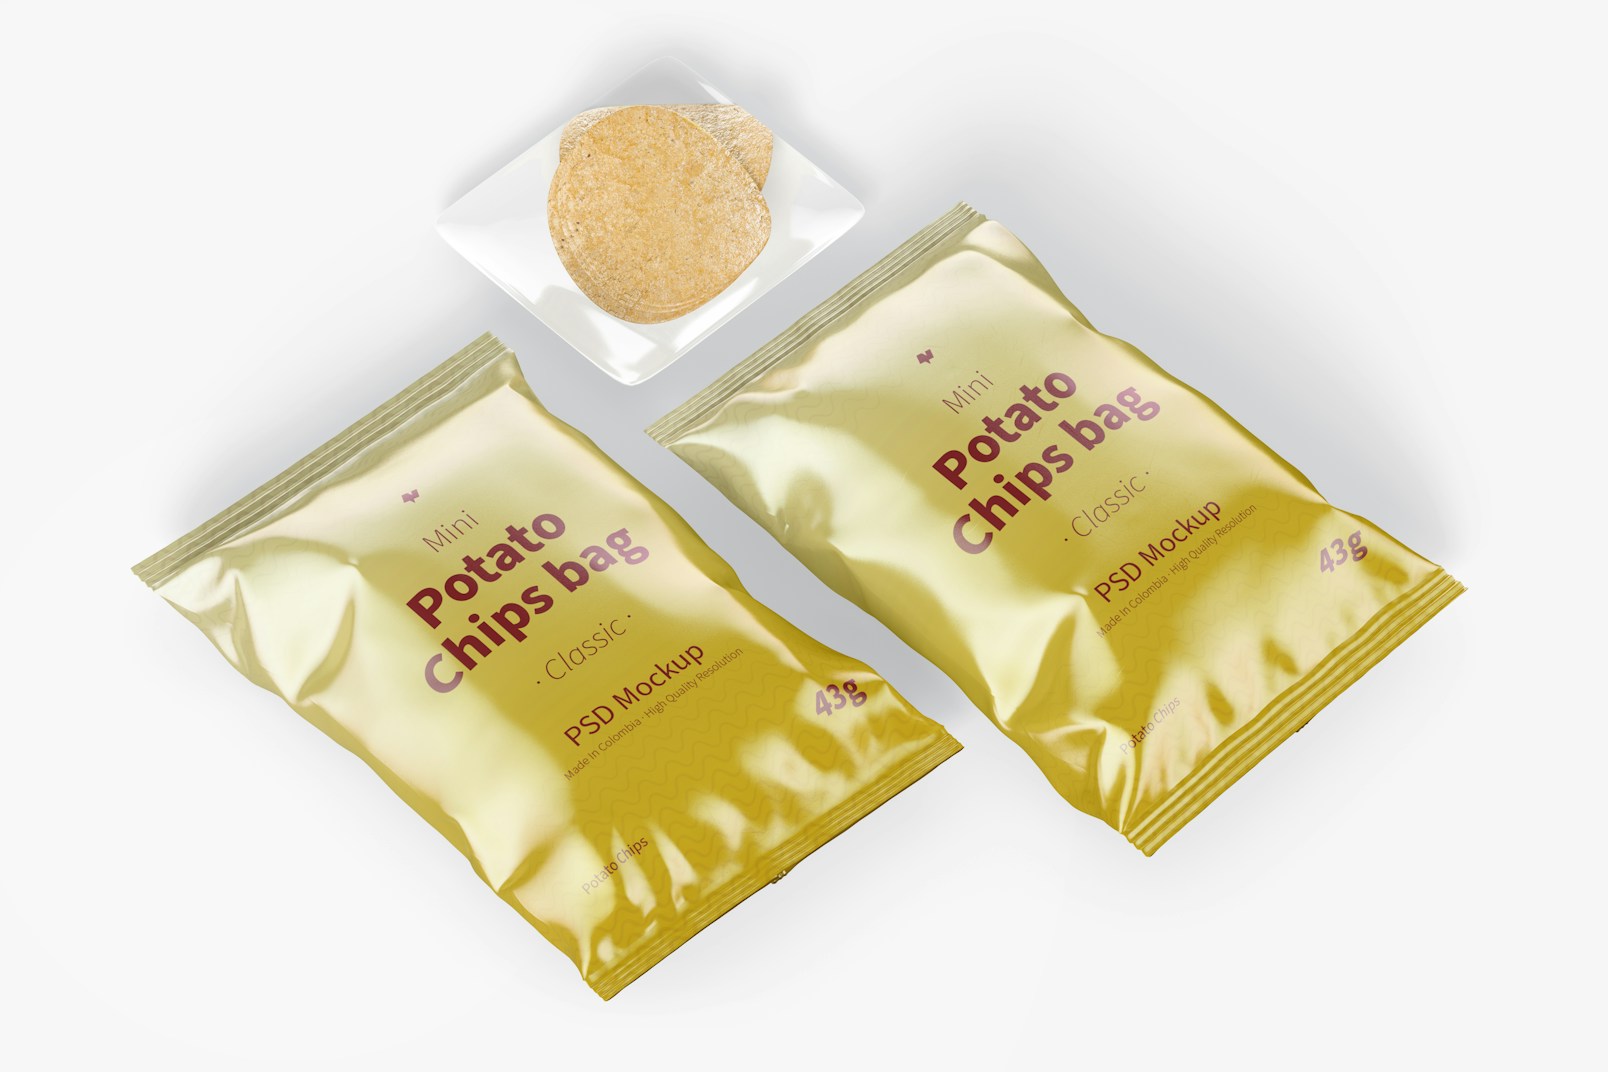 Glossy Mini Potato Chips Bags Mockup, Perspective View 02